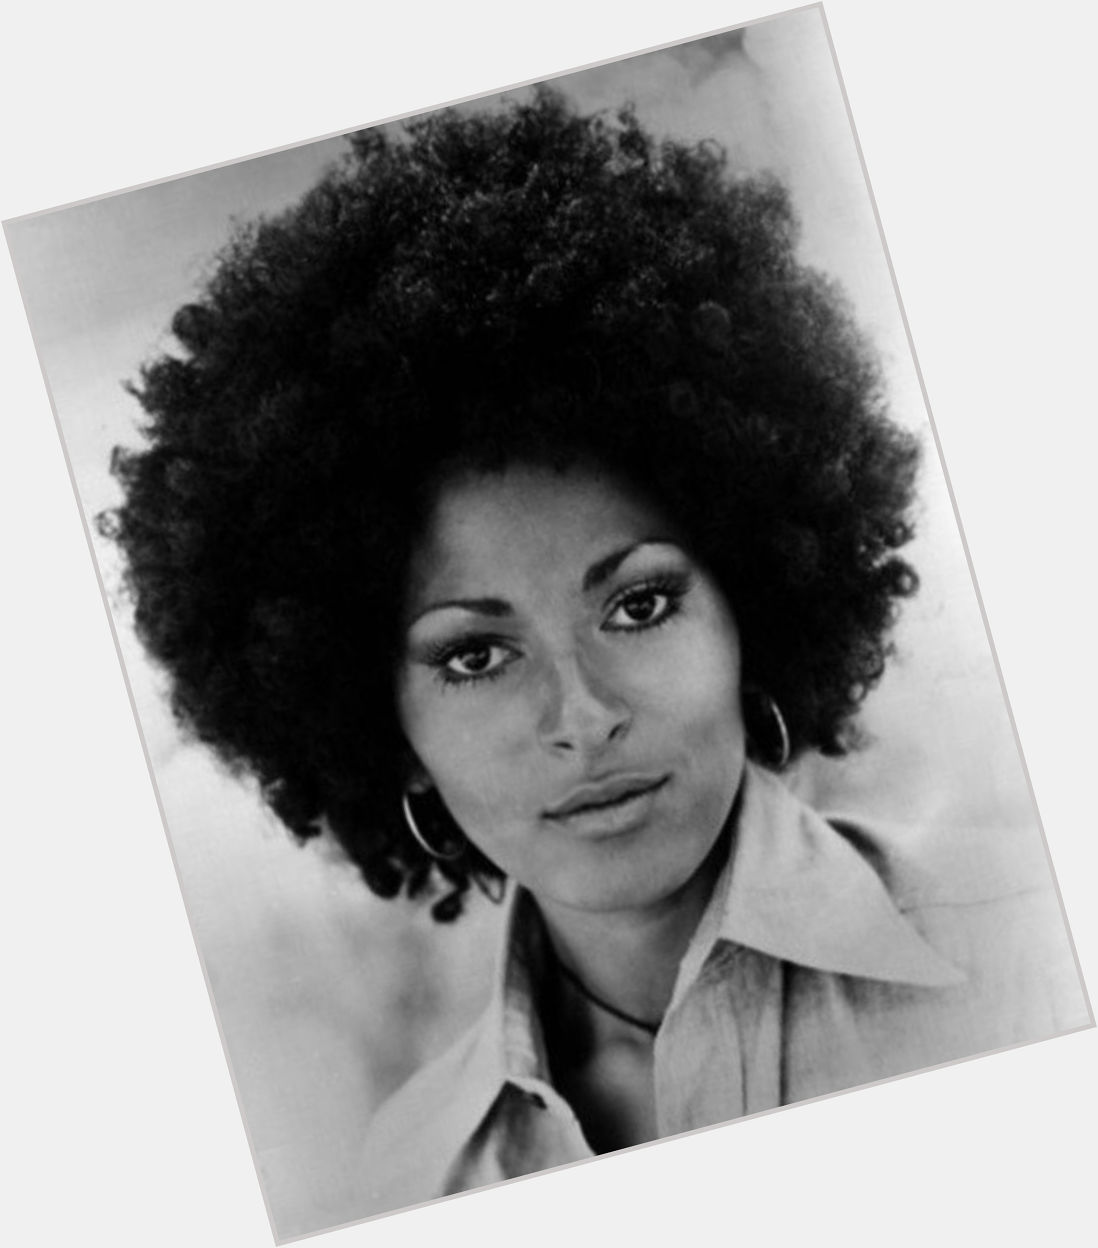 Happy Birthday Pam Grier!
The Walker Collective - A Law Firm For Creatives
 